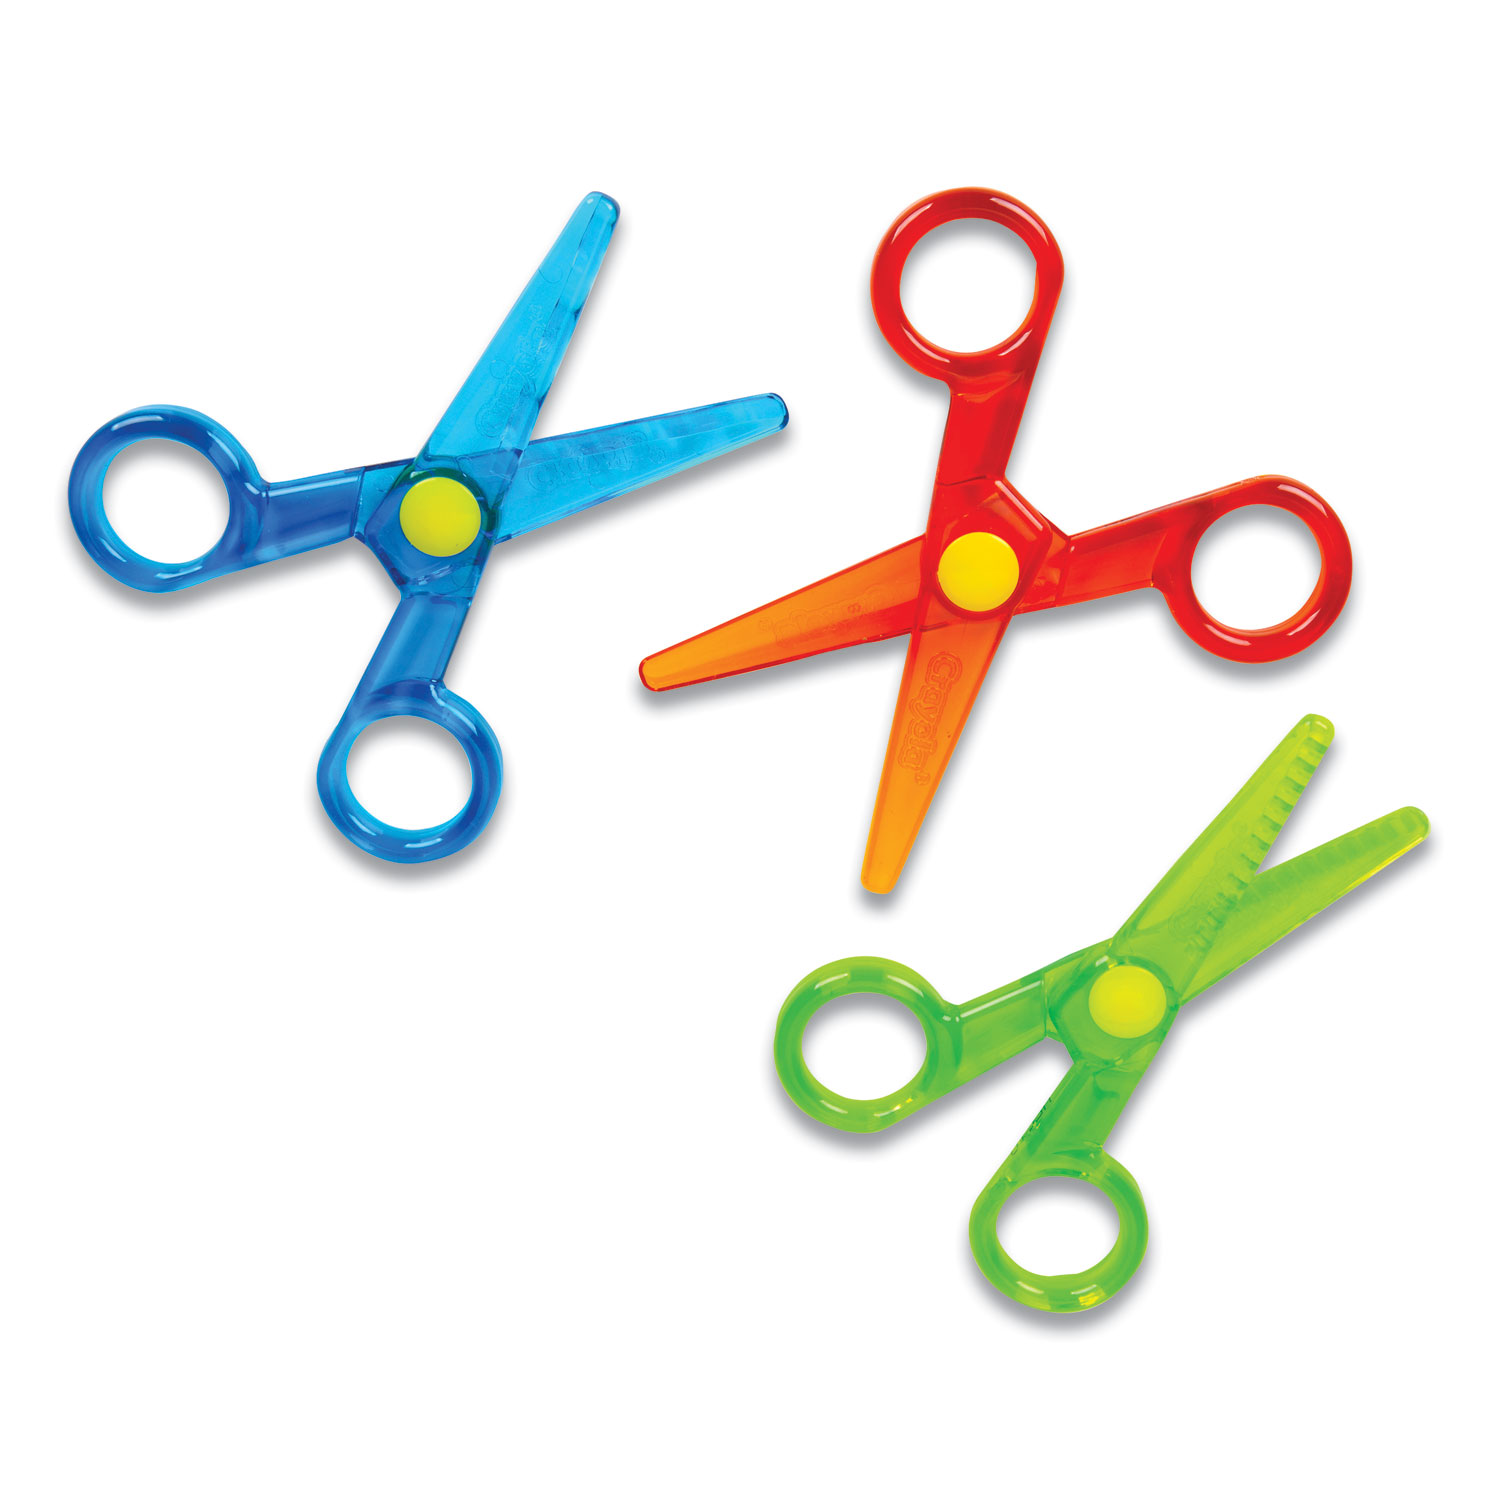 Crayola® My First Crayola Safety Scissors, Rounded Tip, Assorted